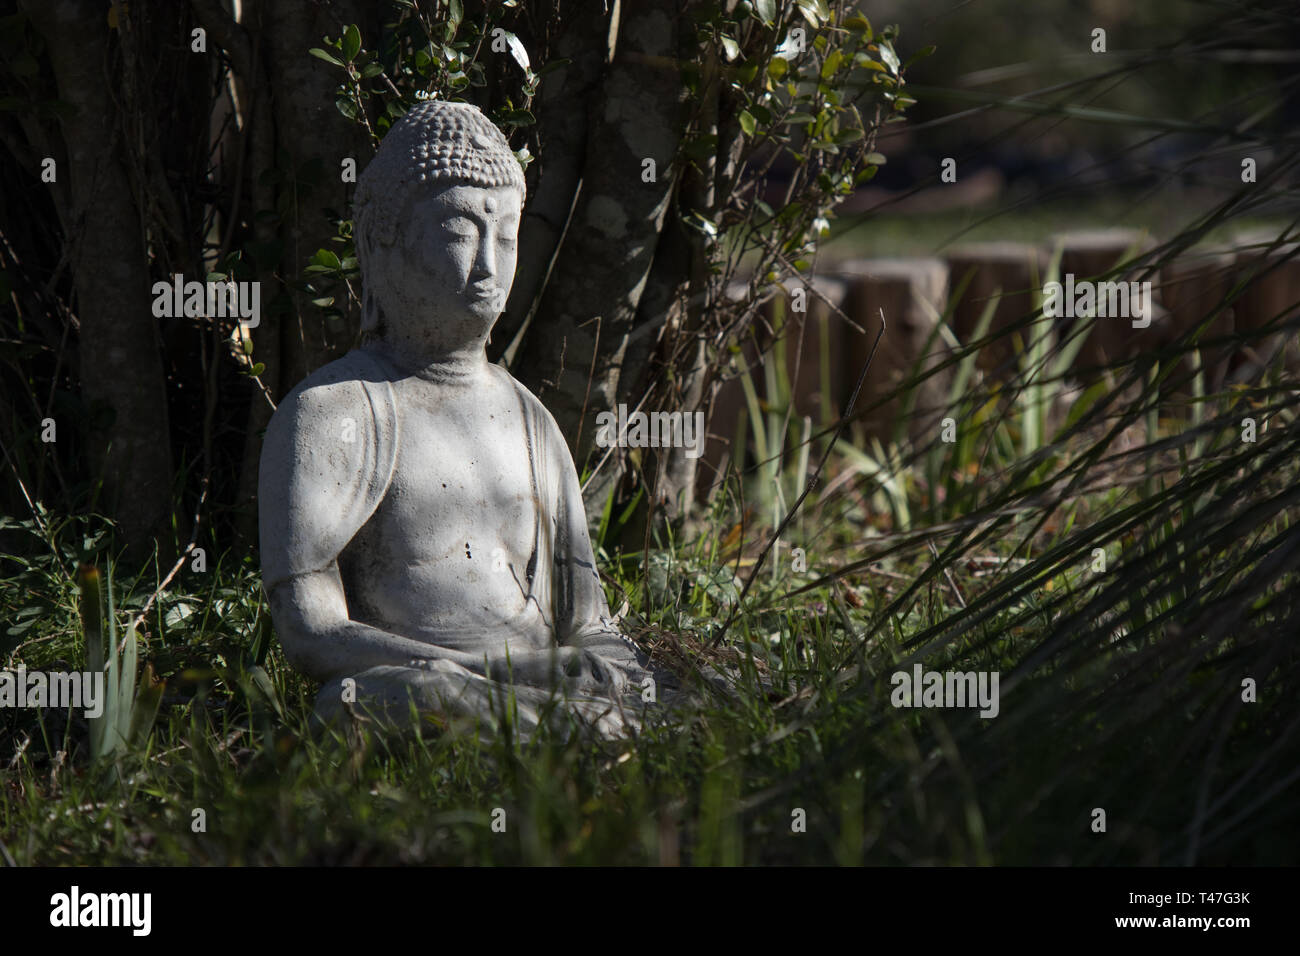 A statue of the Buddha meditating among tall grass and trees Stock Photo